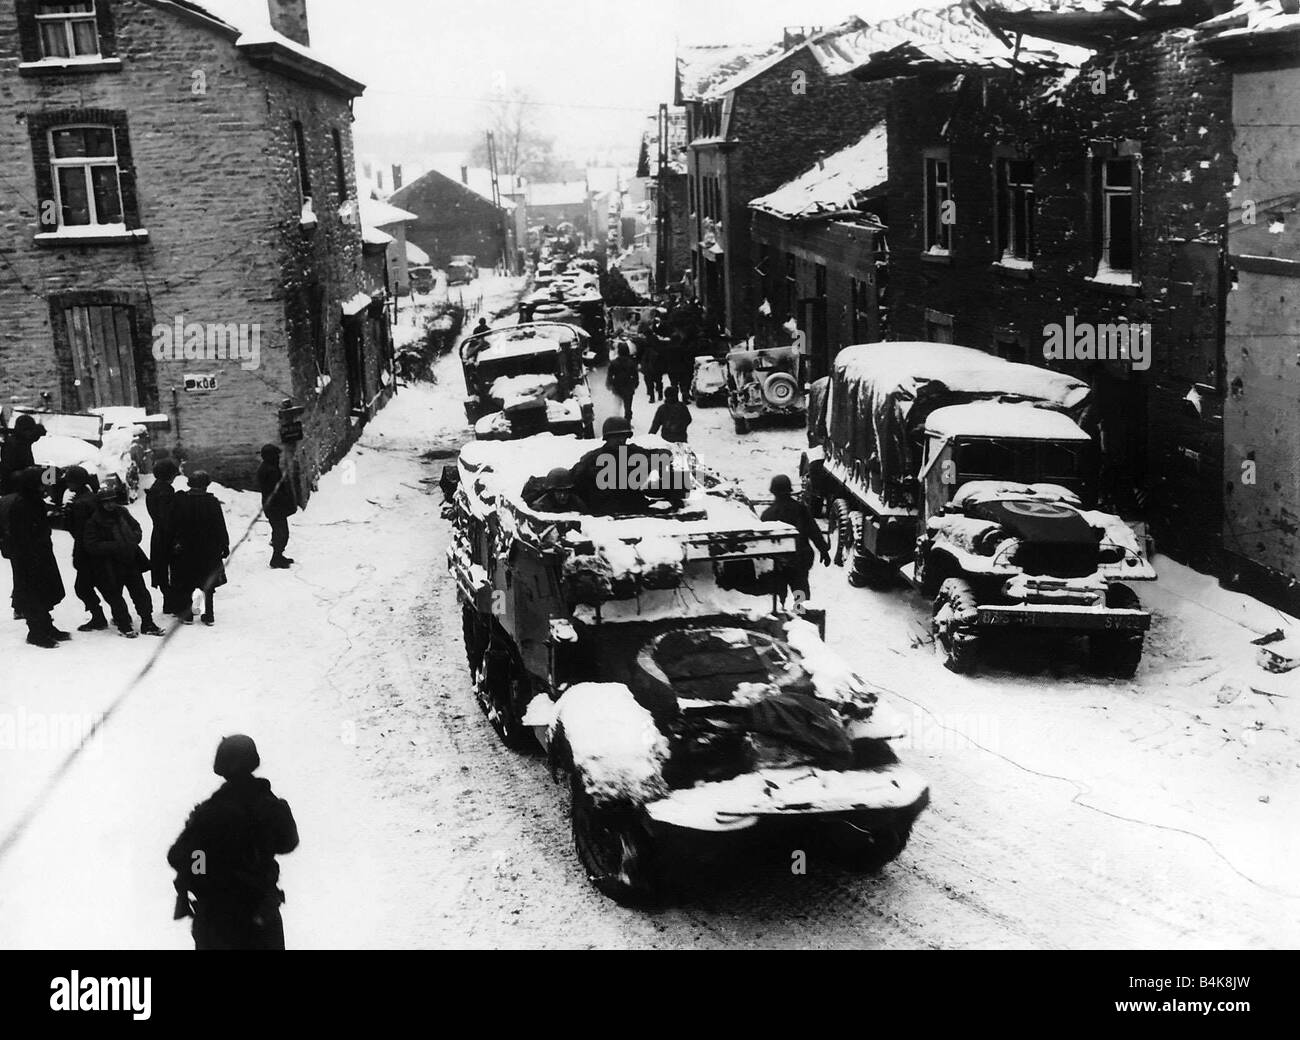 American troops pass through snow covered street in Lierheux Belgium during WW2 Stock Photo